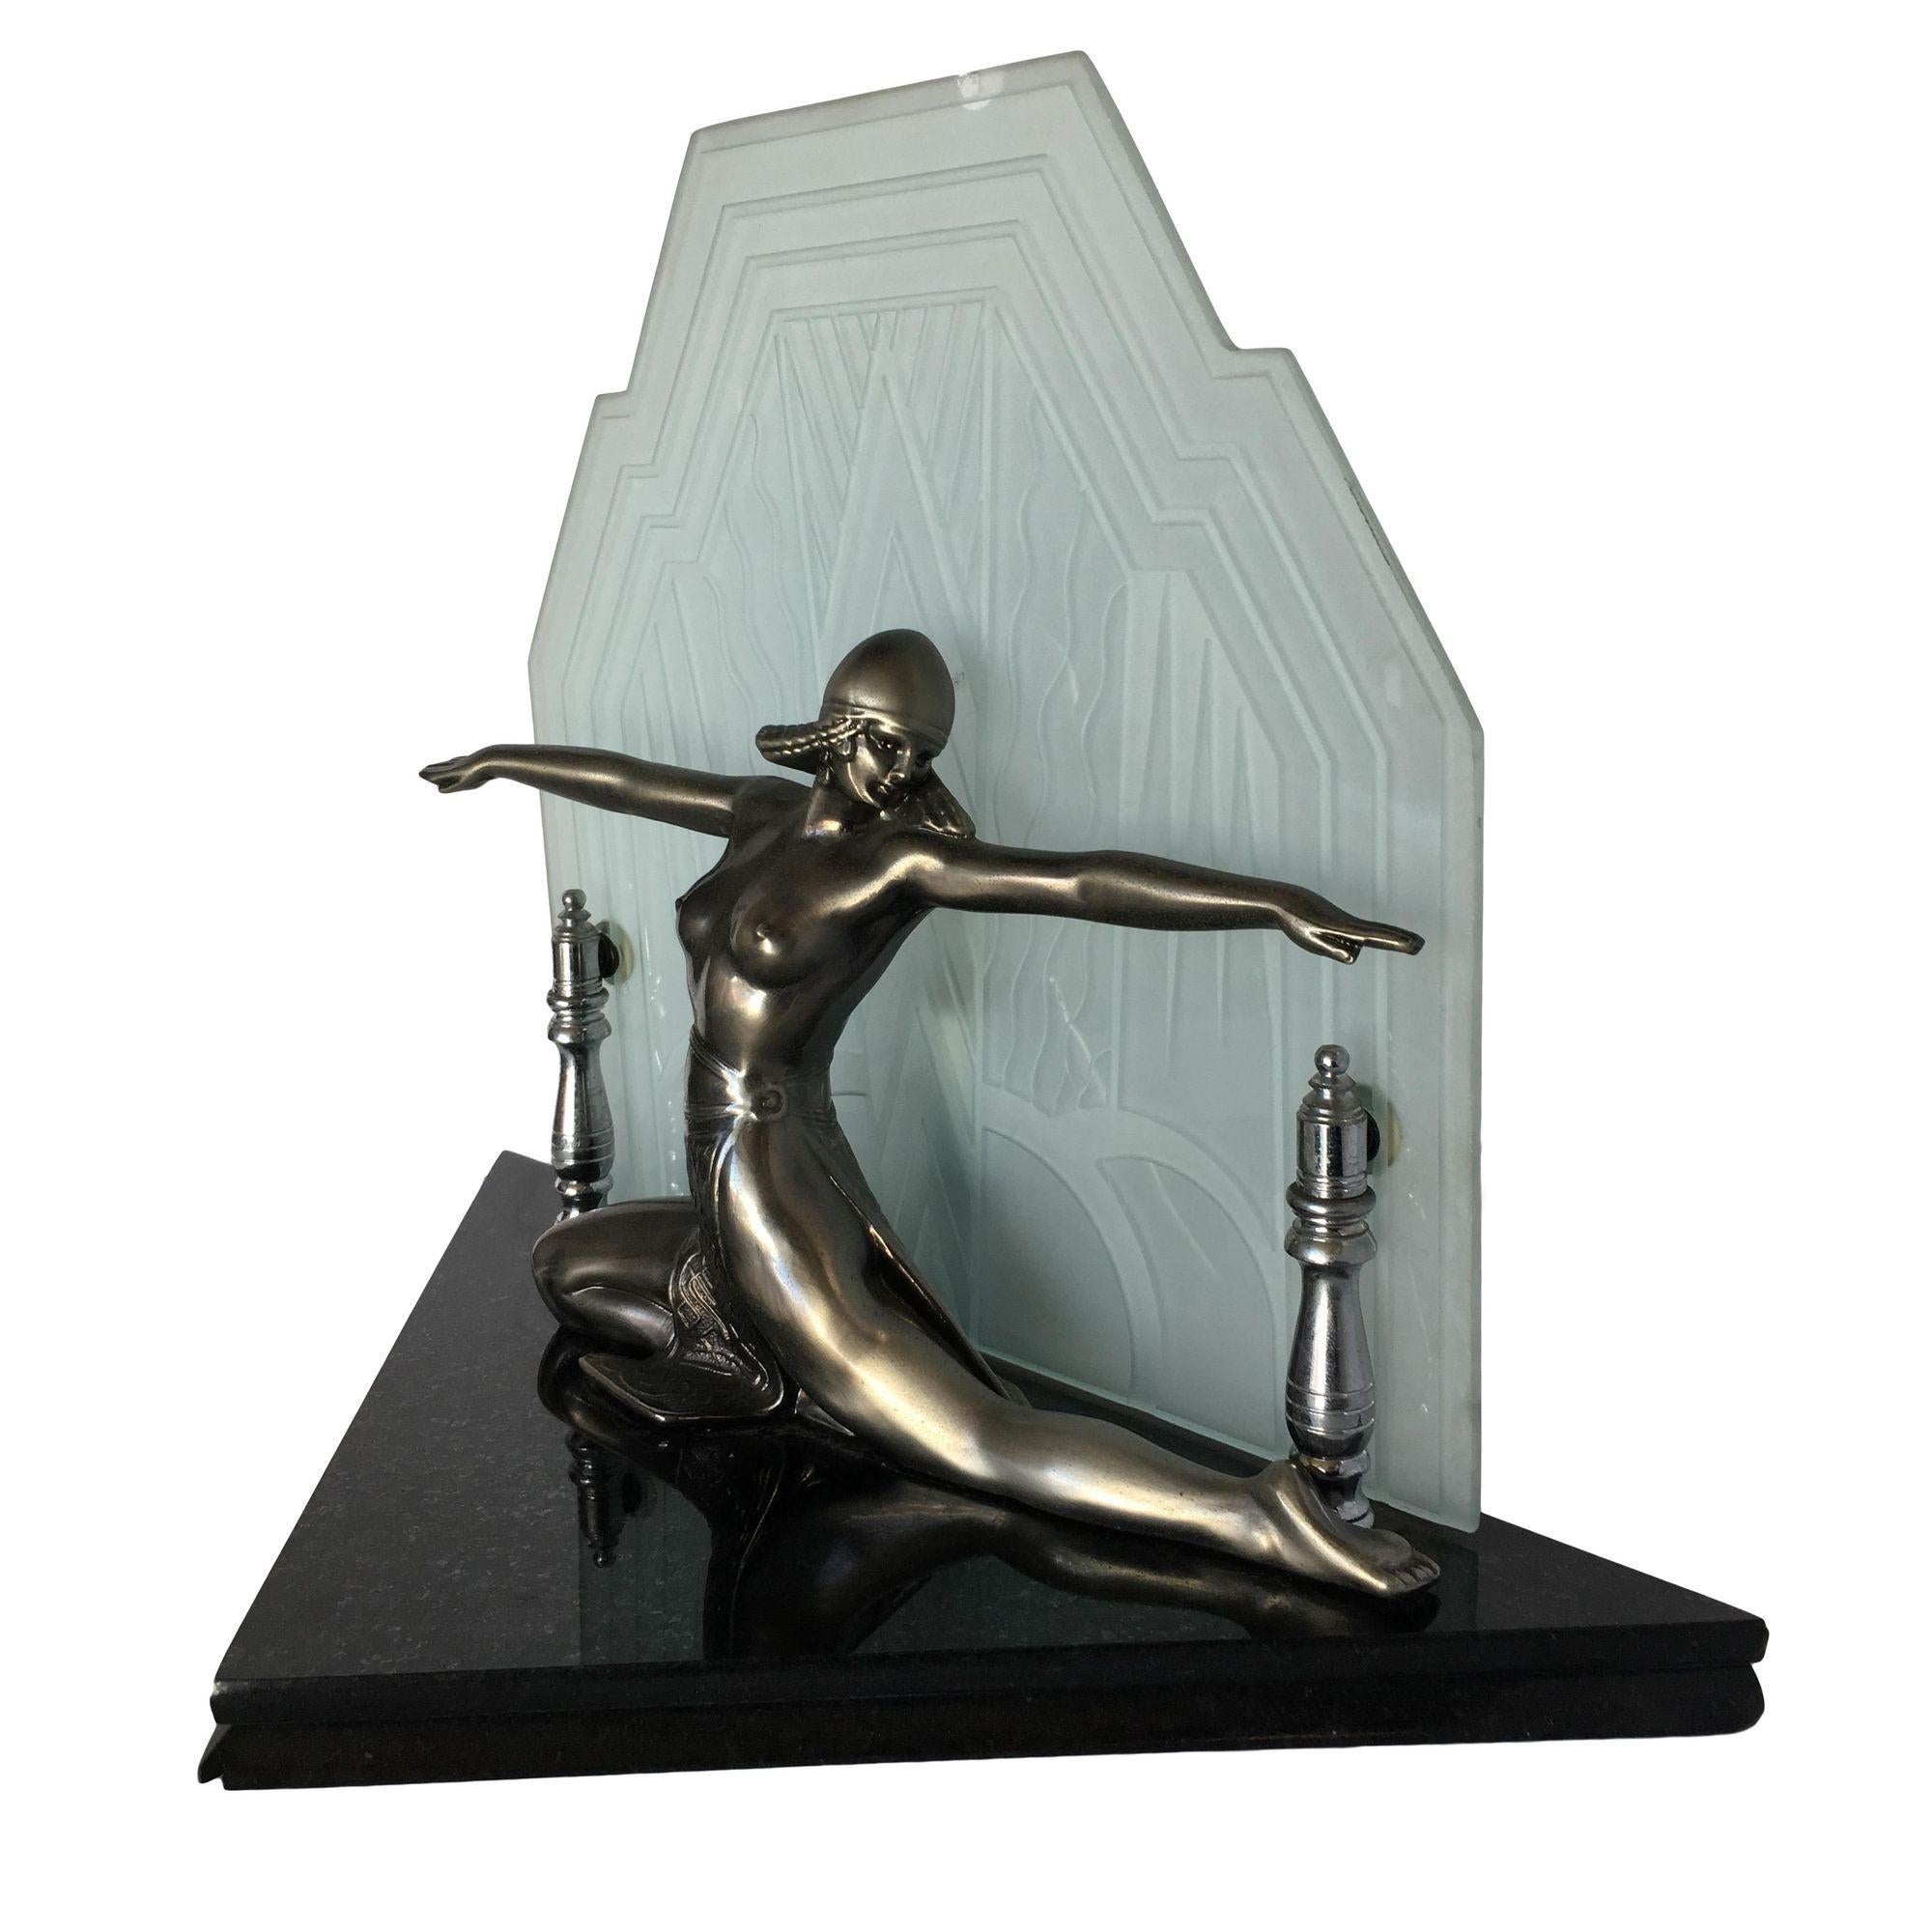 Art Deco Revival Chrome Art Deco Cleopatra Lamp with Etched Glass Shade In Excellent Condition For Sale In Van Nuys, CA